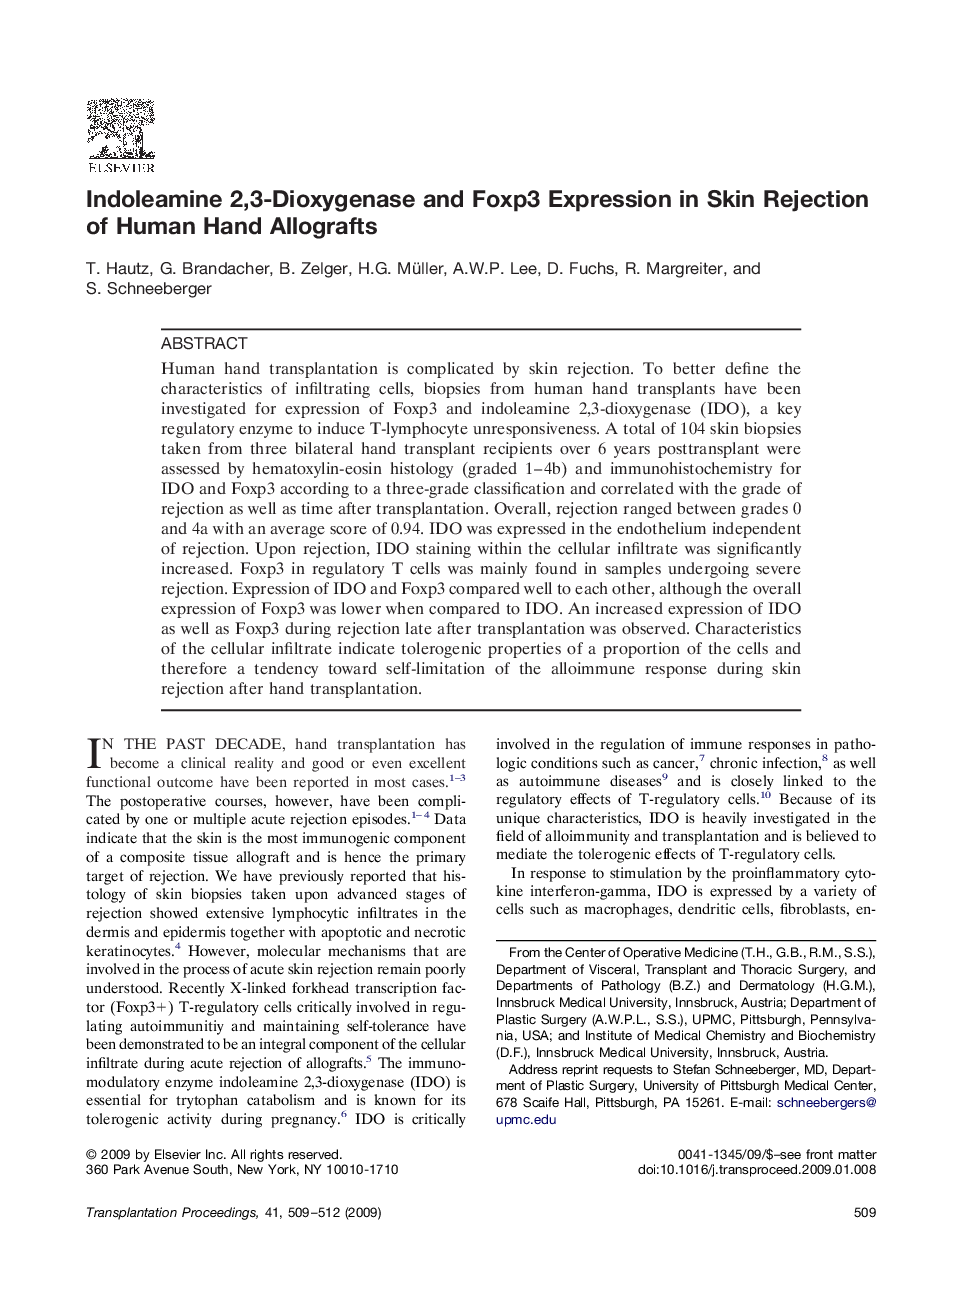 Indoleamine 2,3-Dioxygenase and Foxp3 Expression in Skin Rejection of Human Hand Allografts